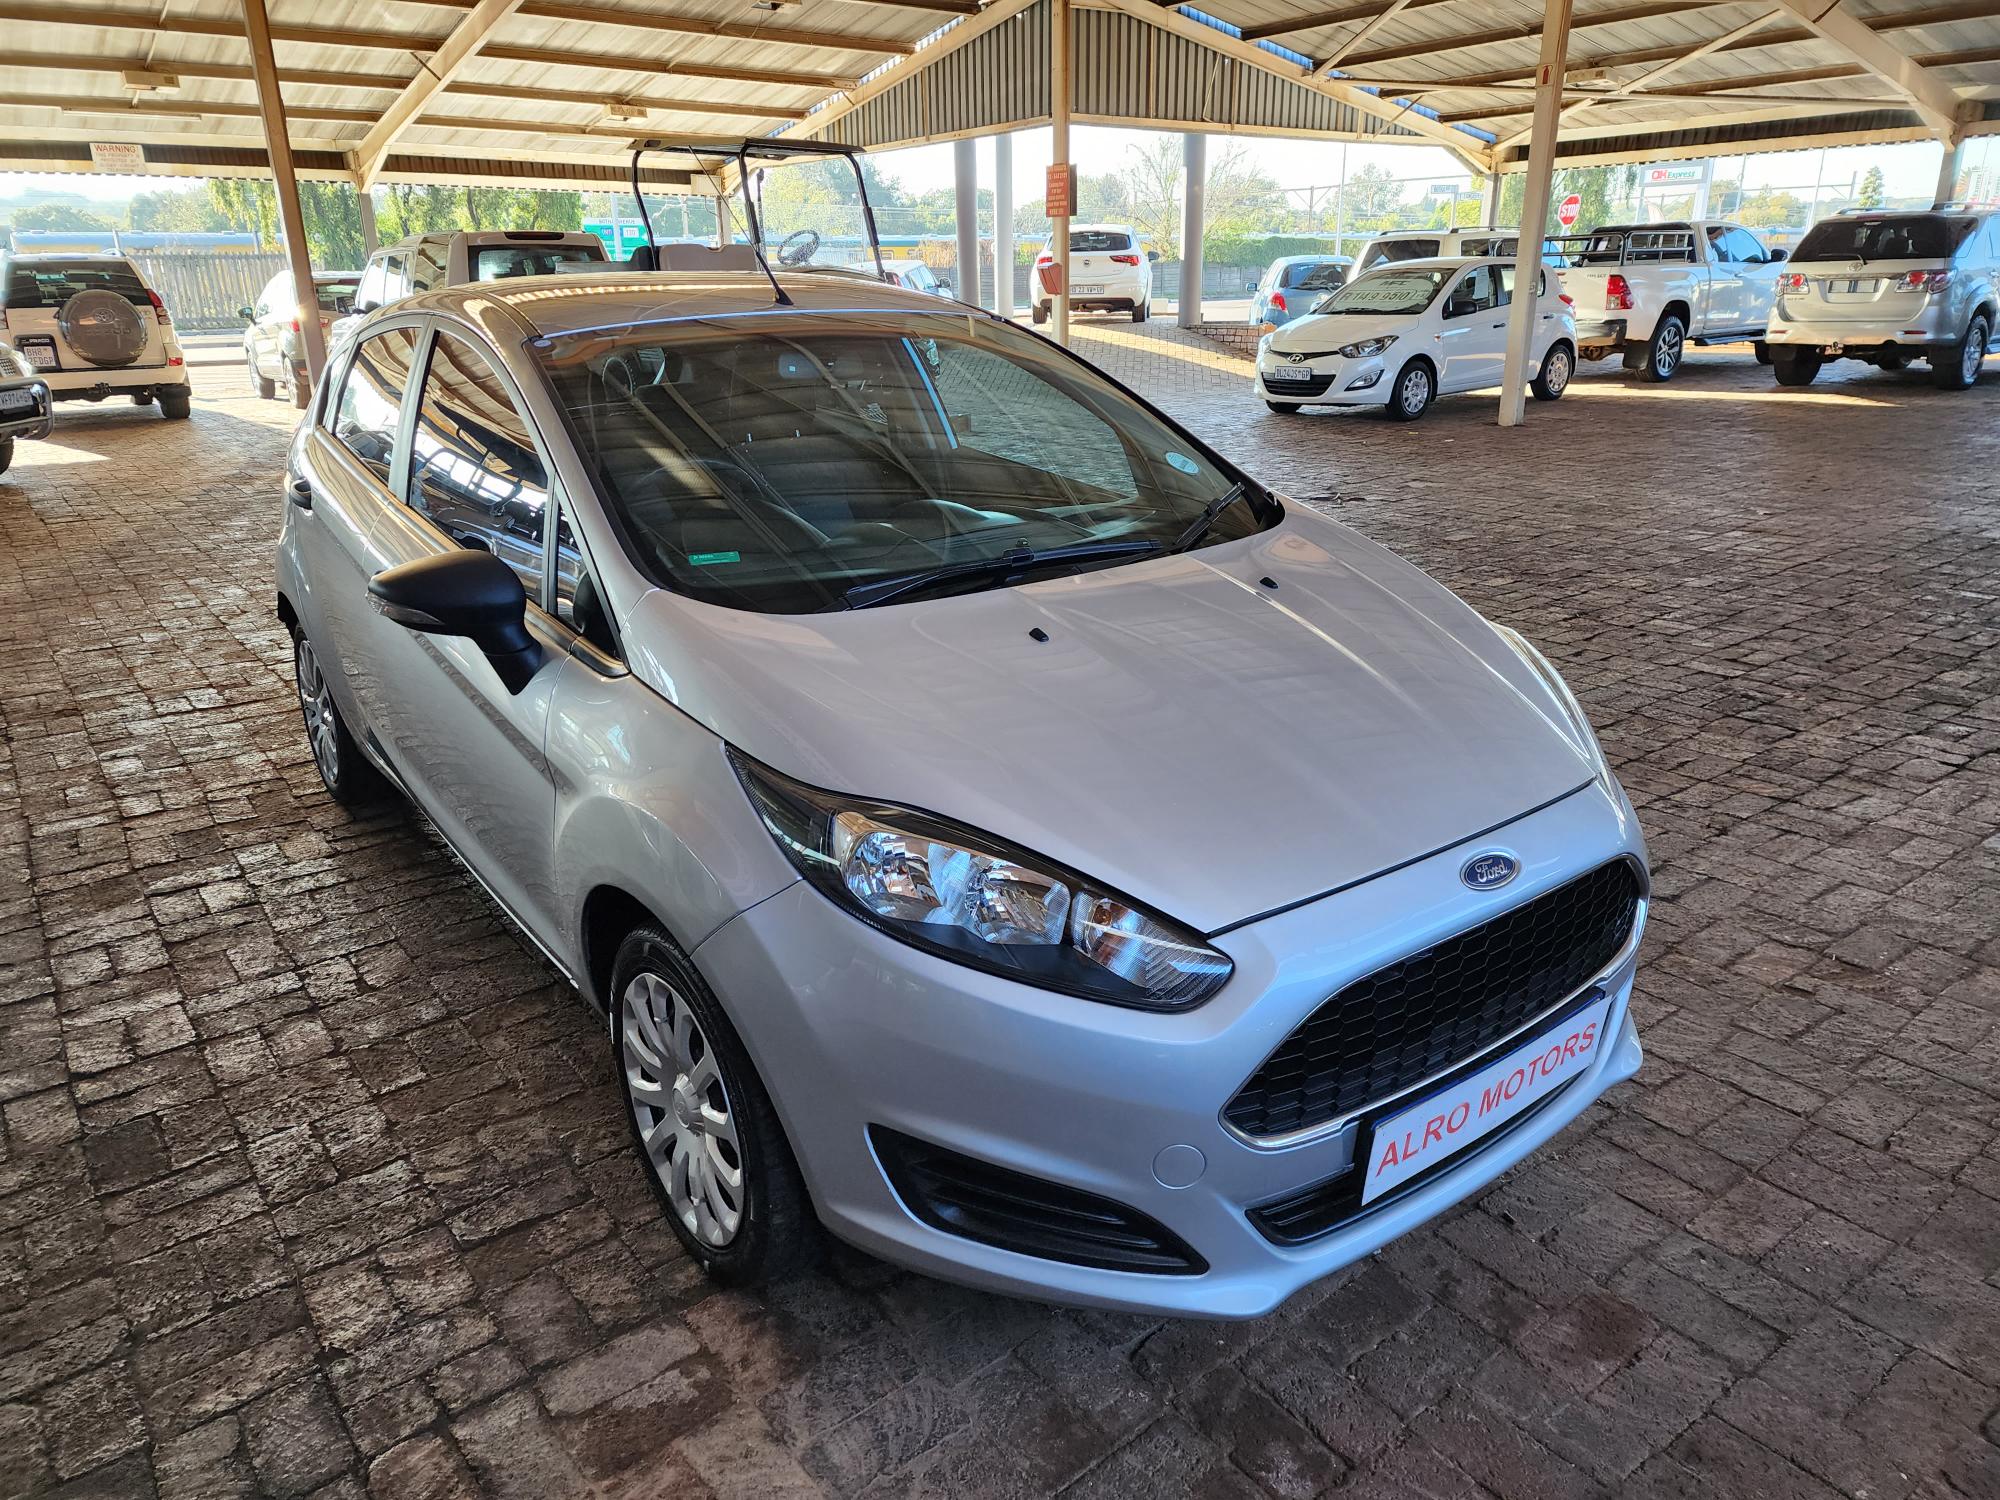 2017 FORD FIESTA 1.4 AMBIENTE 5 Dr full